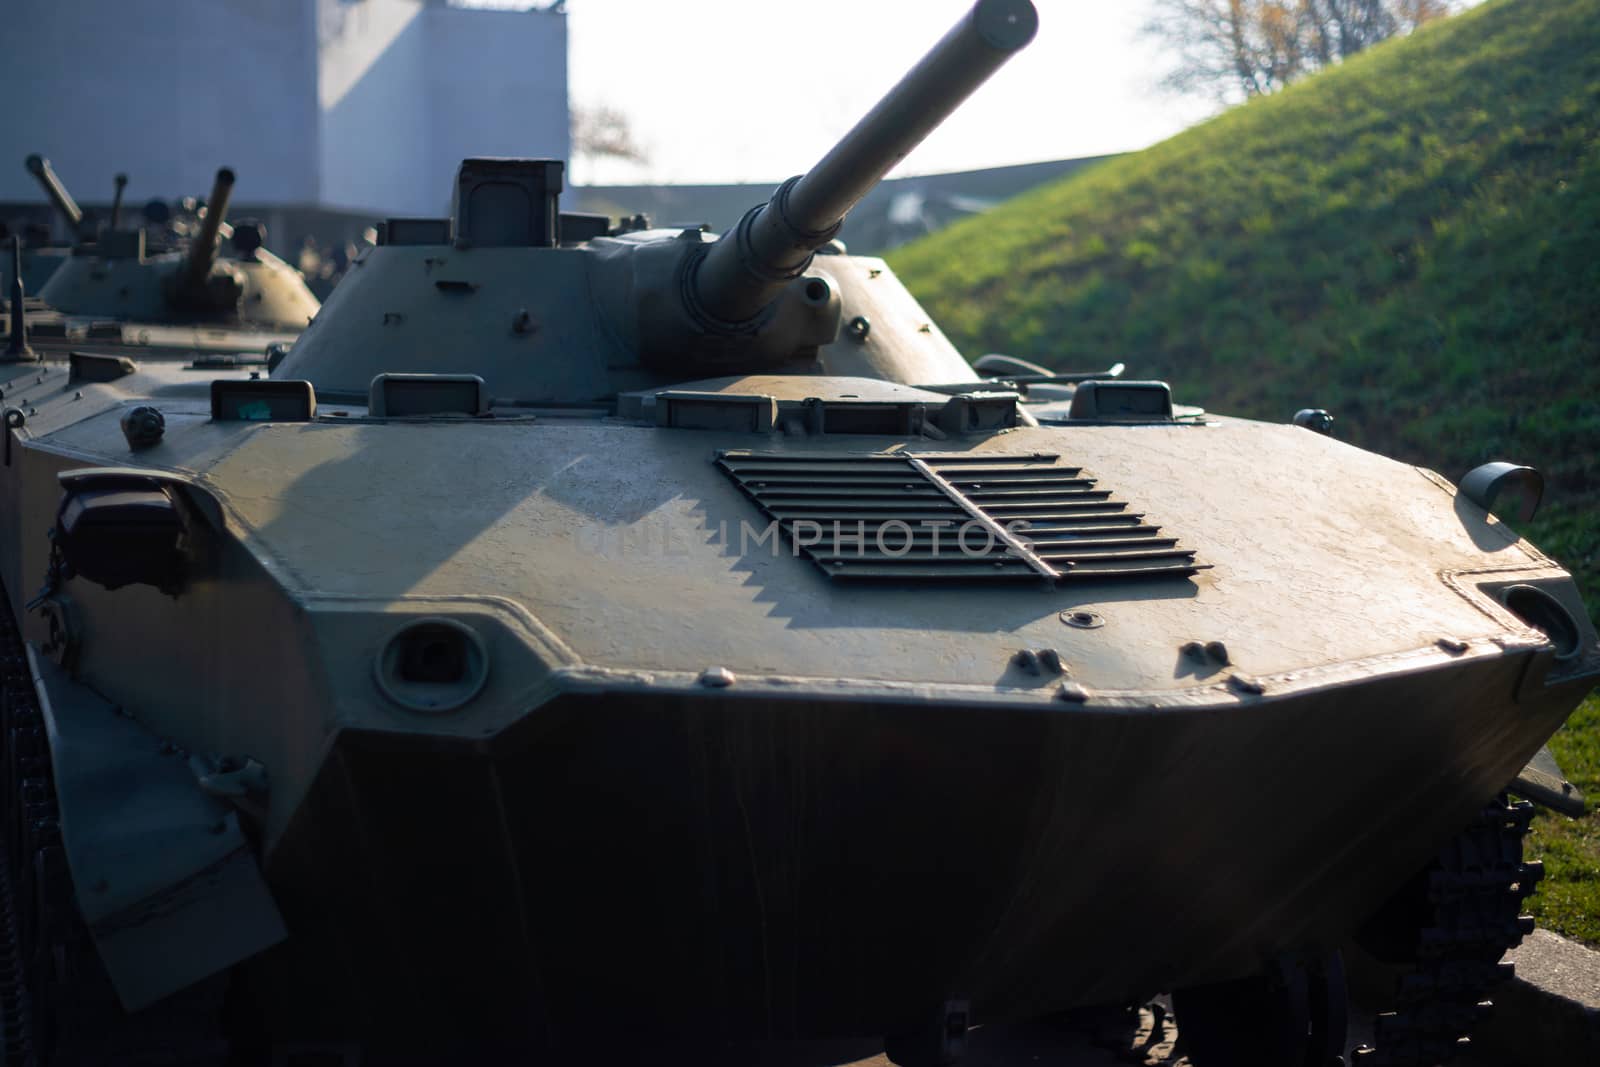 Parts of the hull of the armored infantry vehicle. In front and back of vehicle stays many different armored military vehicles. Military equipment outdoor open air museum.